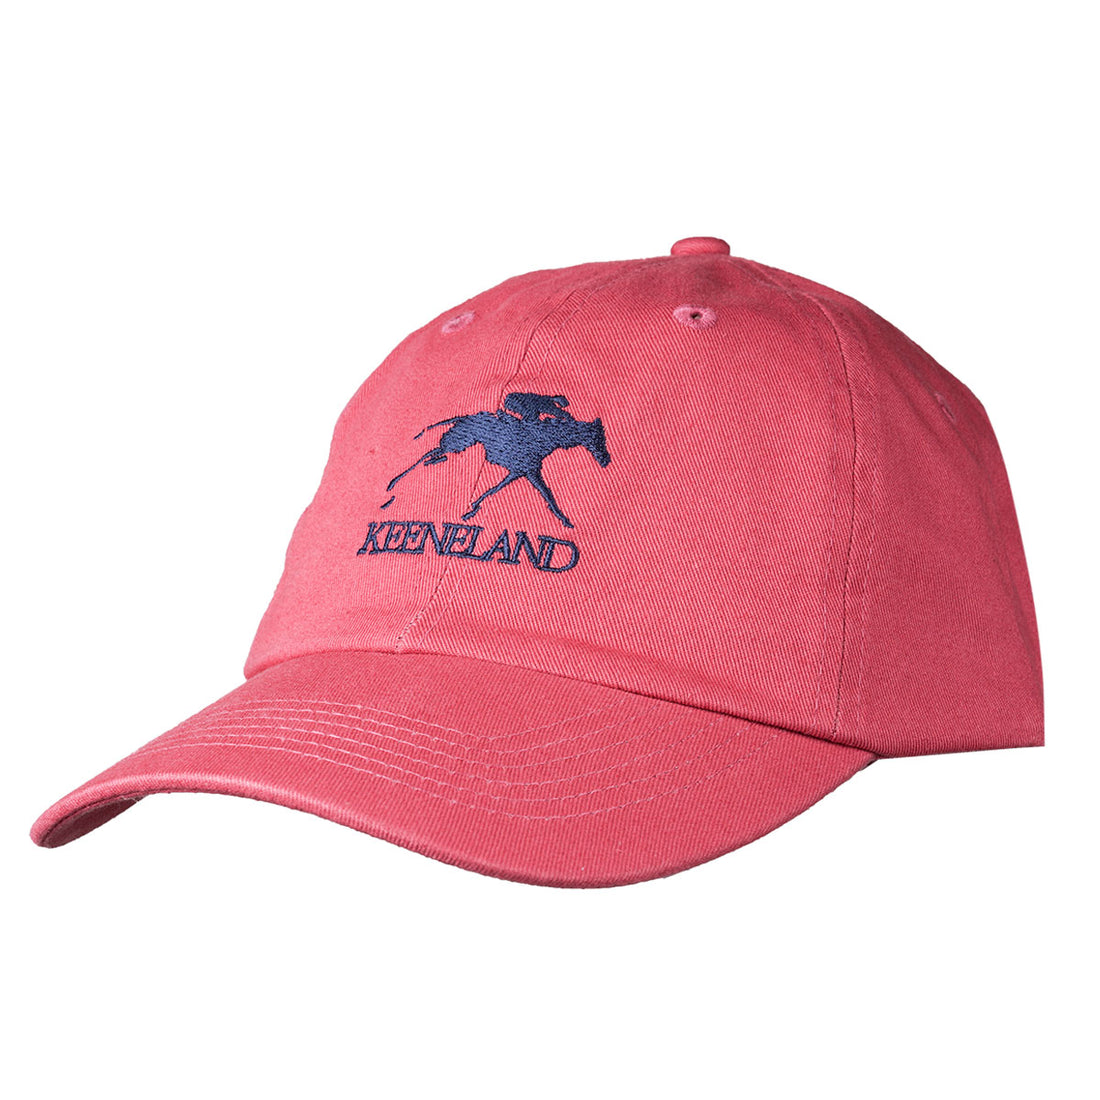 Imperial Keeneland Stacked Logo Cotton Twill Cap